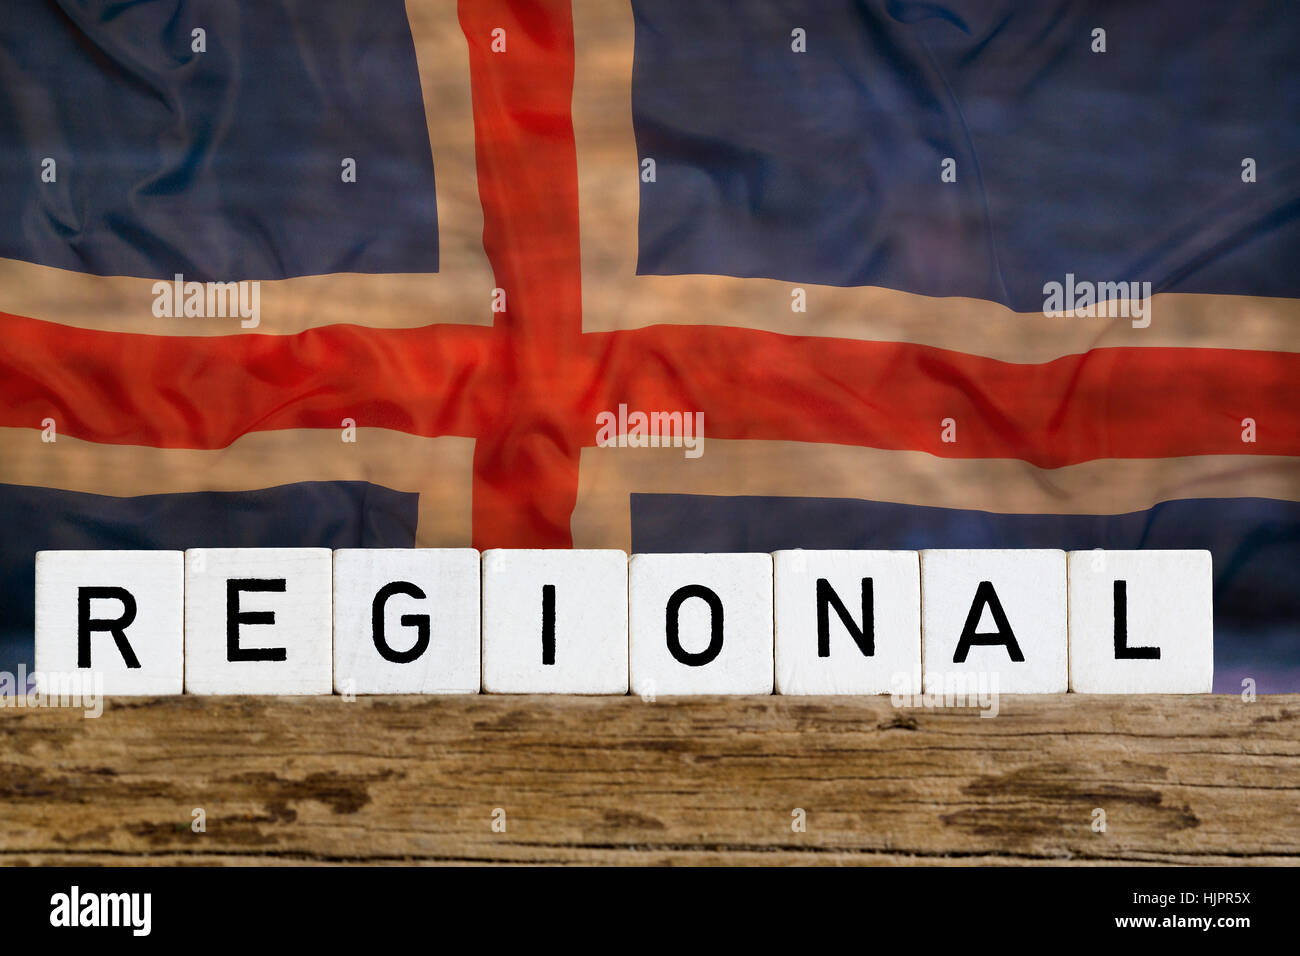 Regional concept, Iceland, on wooden background Stock Photo